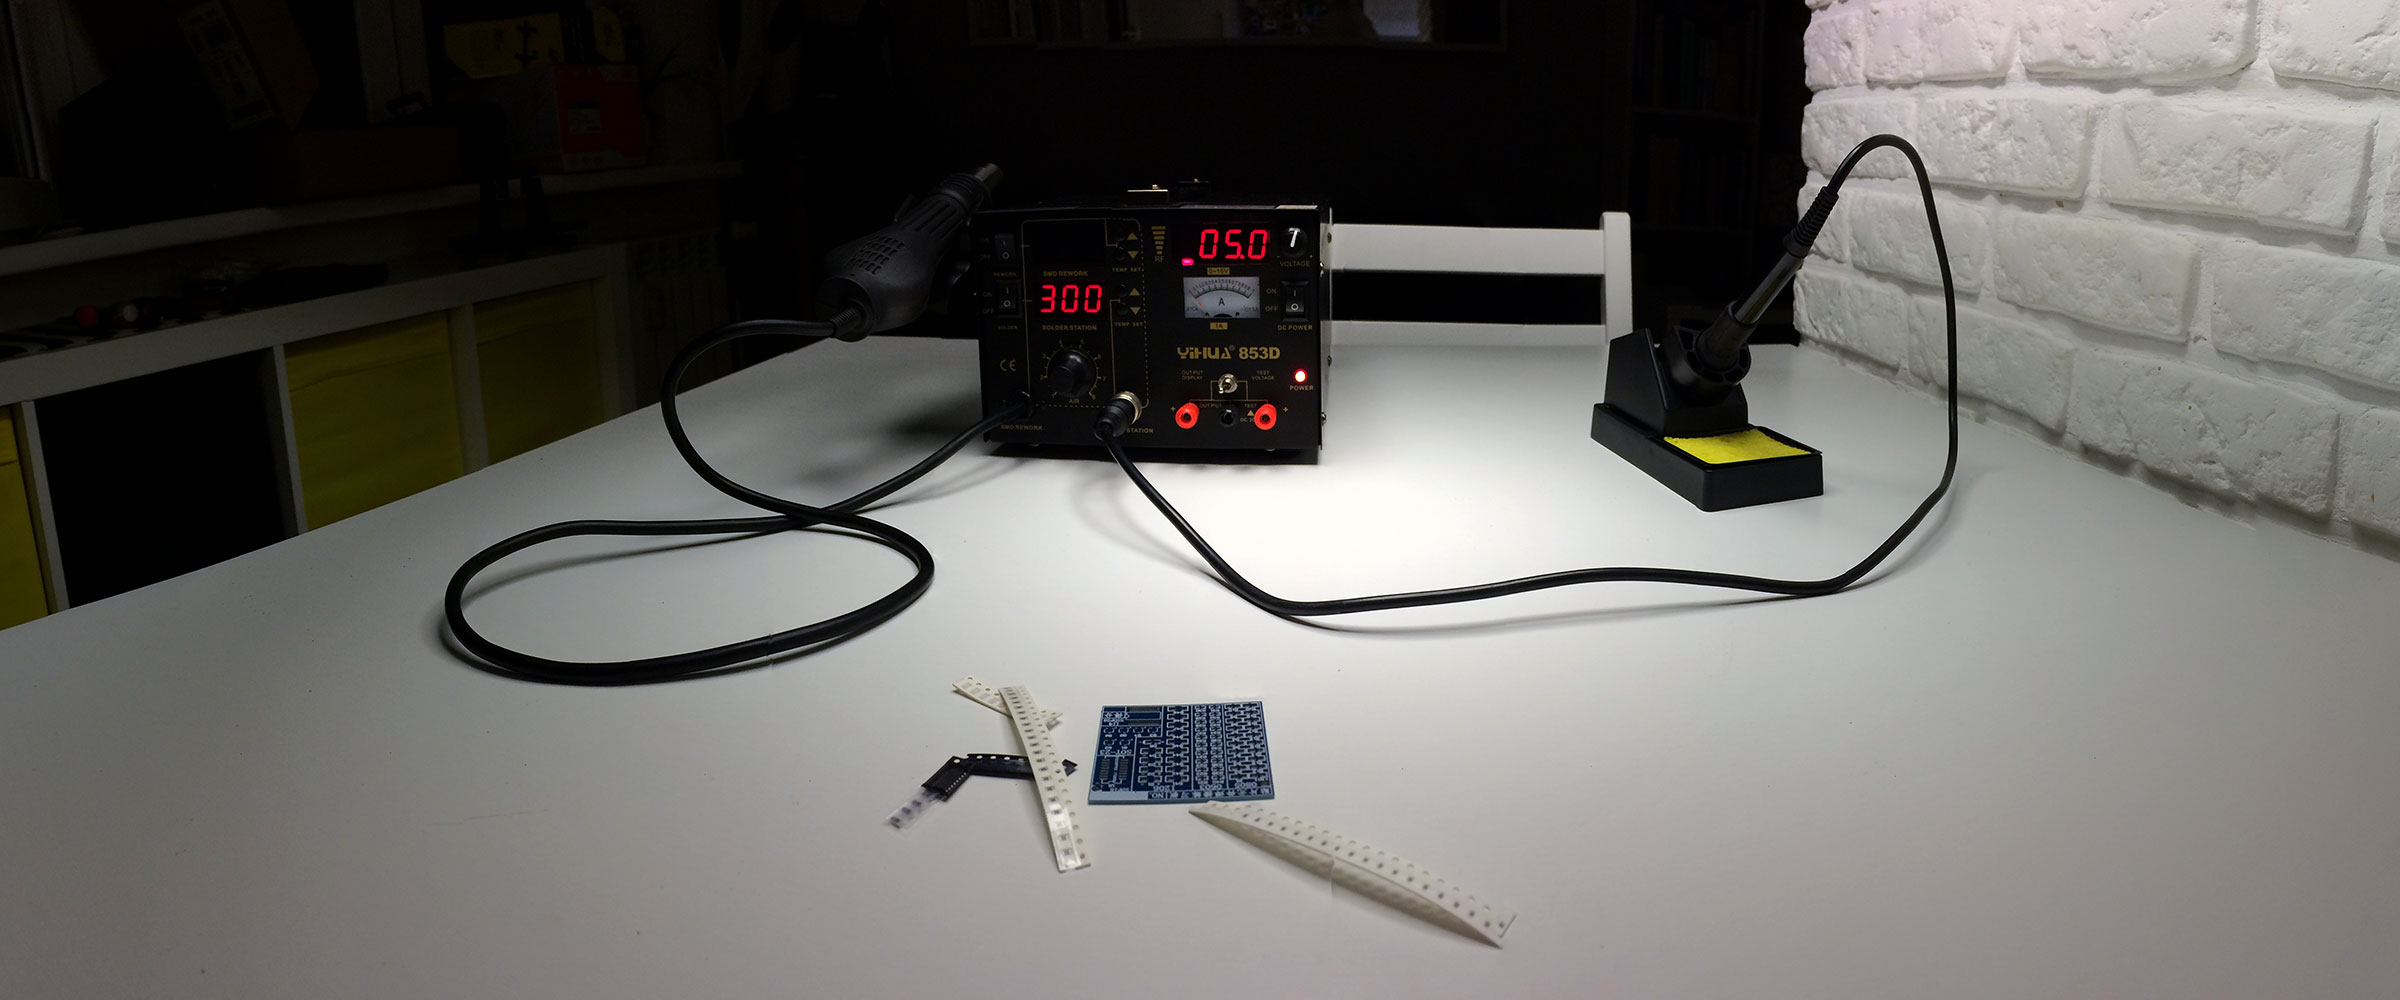 PANORAMA DIARY | Iphoneography blog | Soldering station